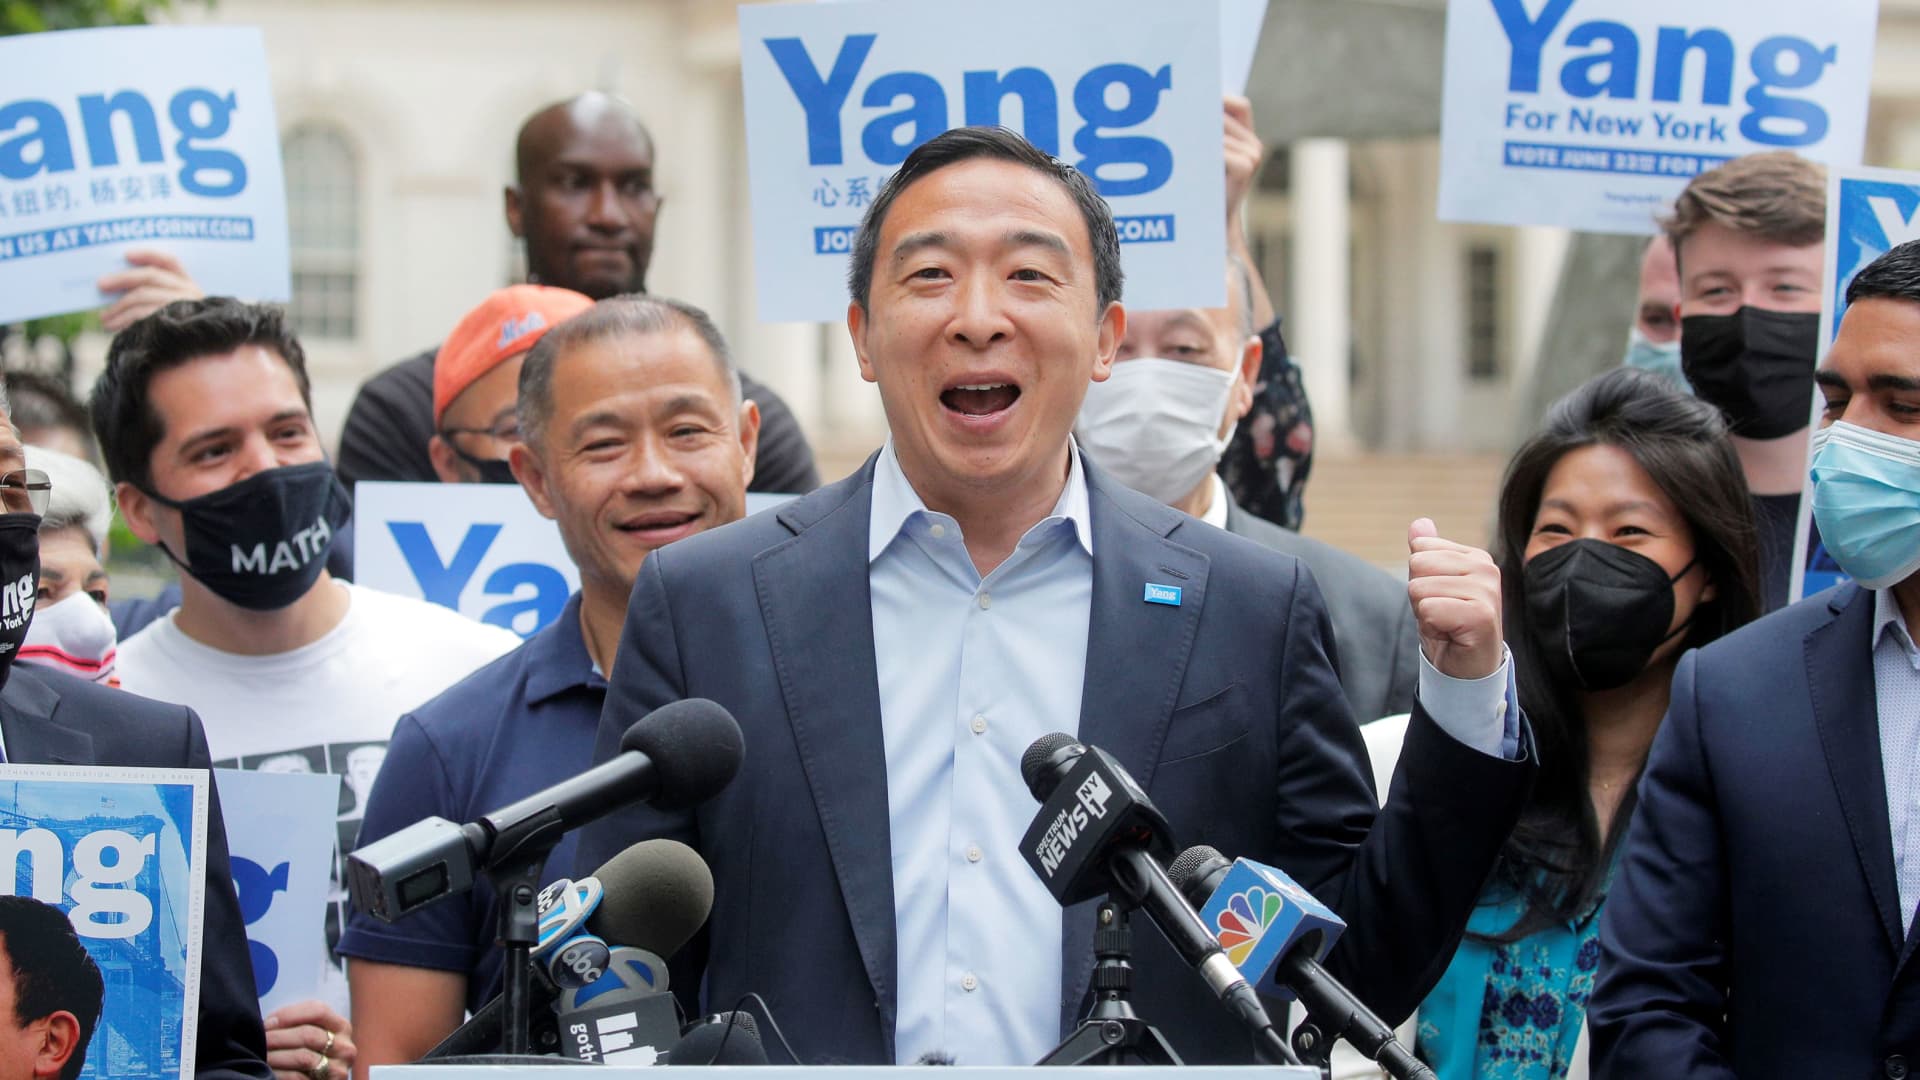 Don’t blame stimulus checks for inflation, says Andrew Yang, who still supports sending free cash to most Americans